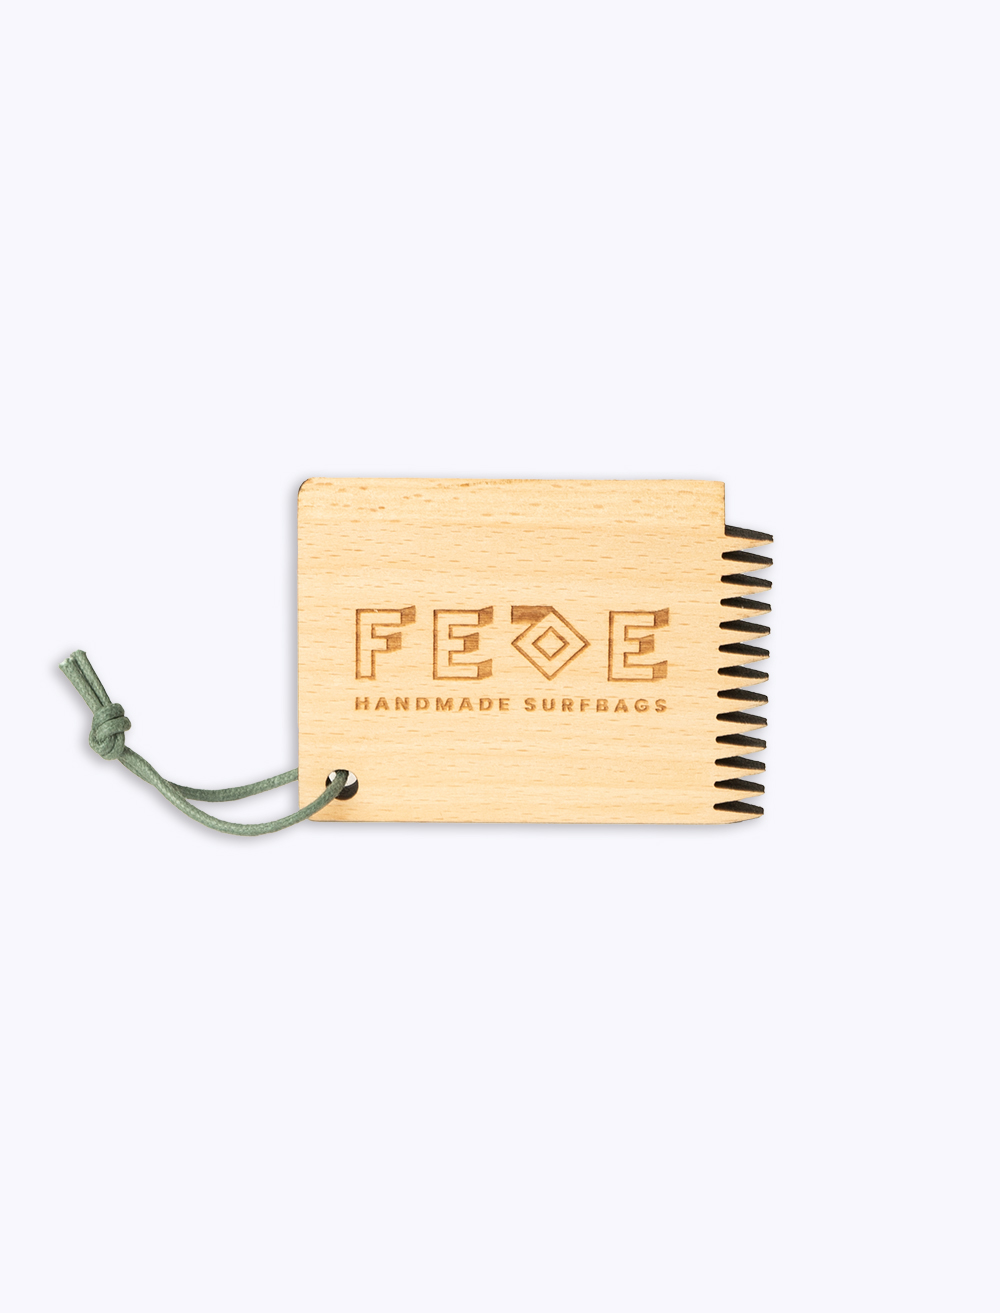 Wooden Wax Comb - Keep your wax grippy and your feet on the surfboard!